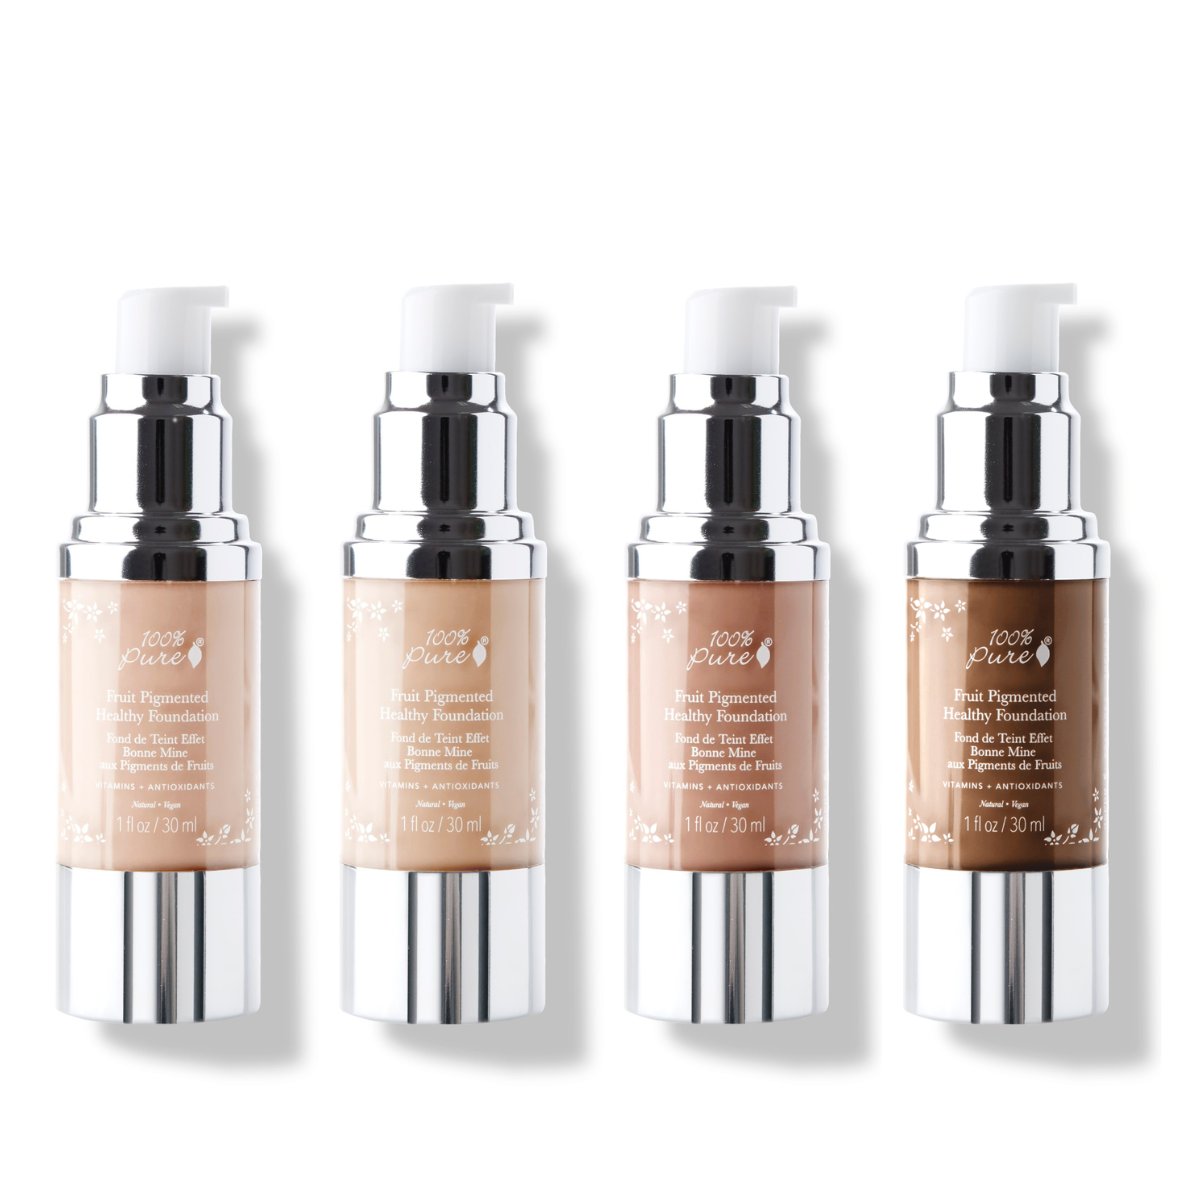 100 Percent Pure Fruit Pigmented Healthy Foundation